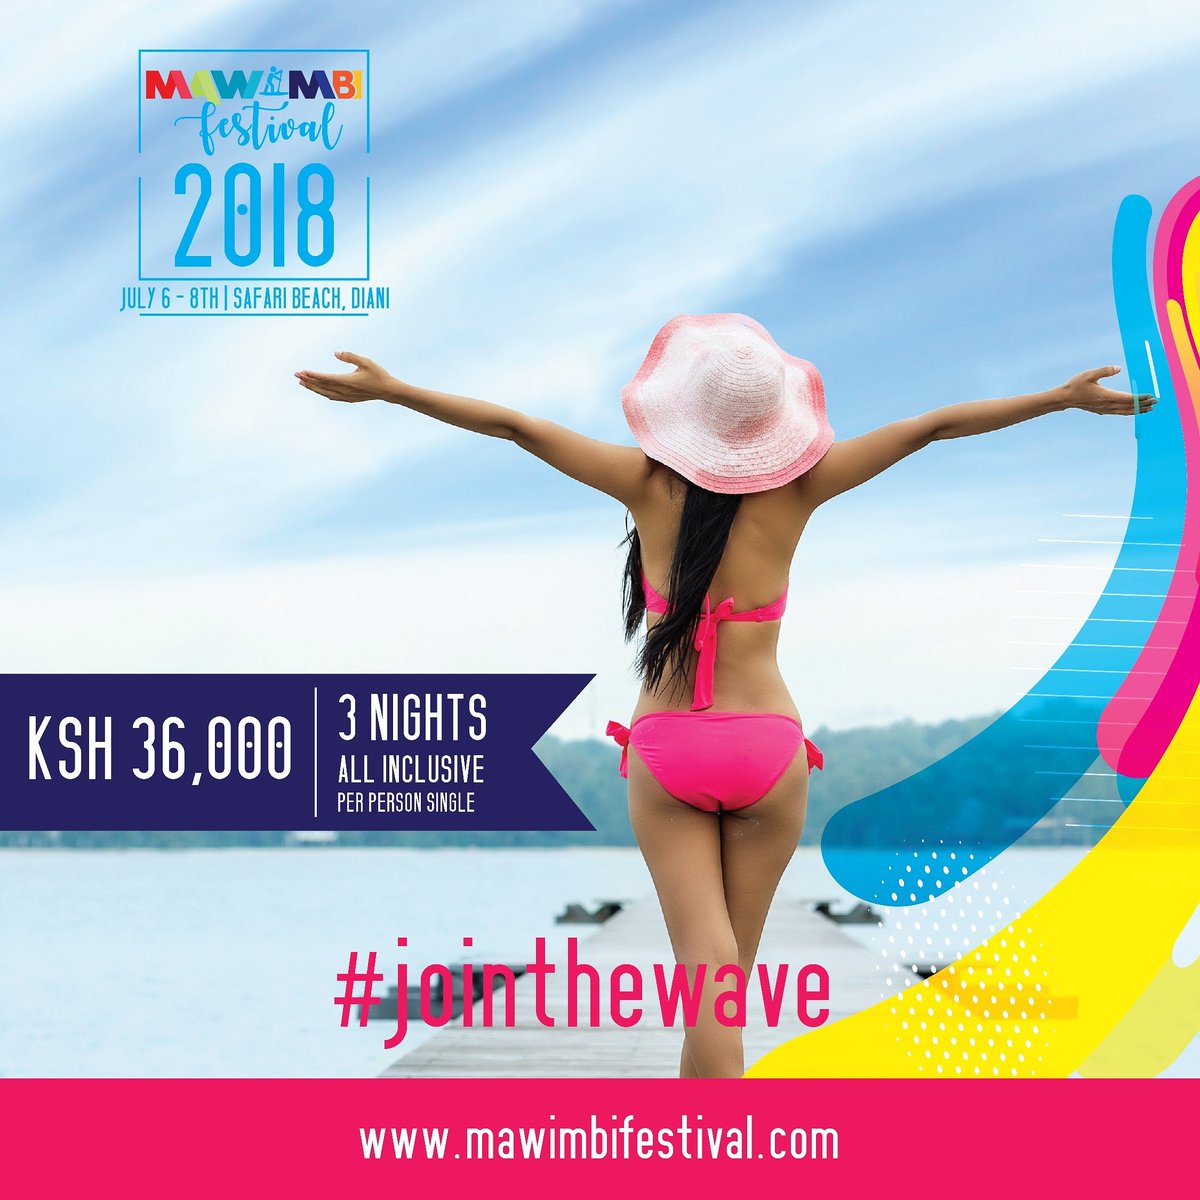 This can be you on July 6-8! Run away from the cold, See you in Diani! Buy your tickets before time runs out.
#jointhewave🌊🌊🌊 #mawimbifestival2018 #mawimbifun #twendediani #tembeakenya #waves #fun #watersports #awesomethings #weekendvibes #holiday #Diani #coastalkenya